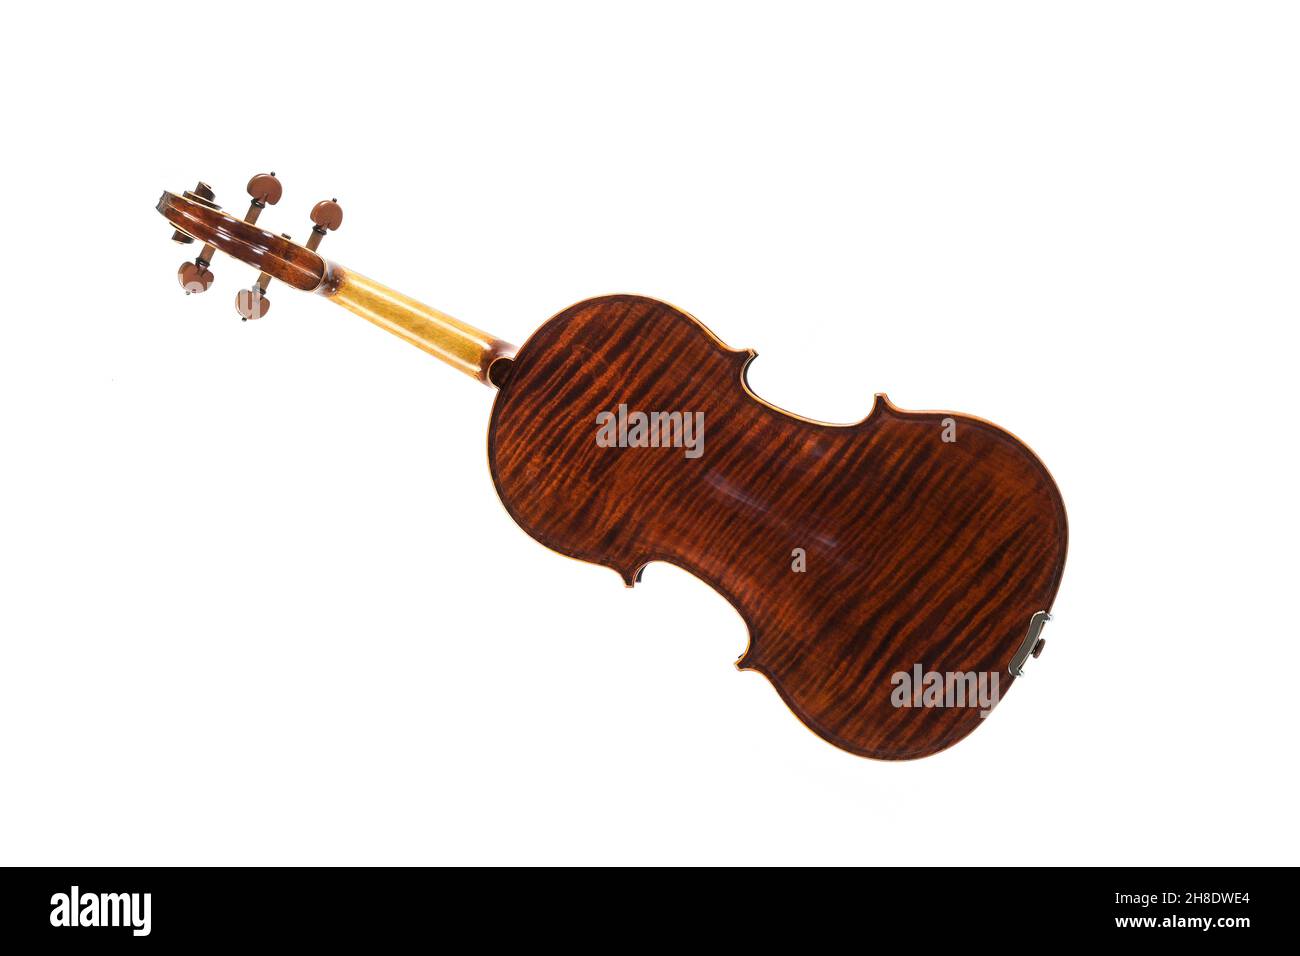 Viola from behind showing the wood grain, stringed musical instrument from the viol family, used in string quartet, chamber music and symphony orchest Stock Photo